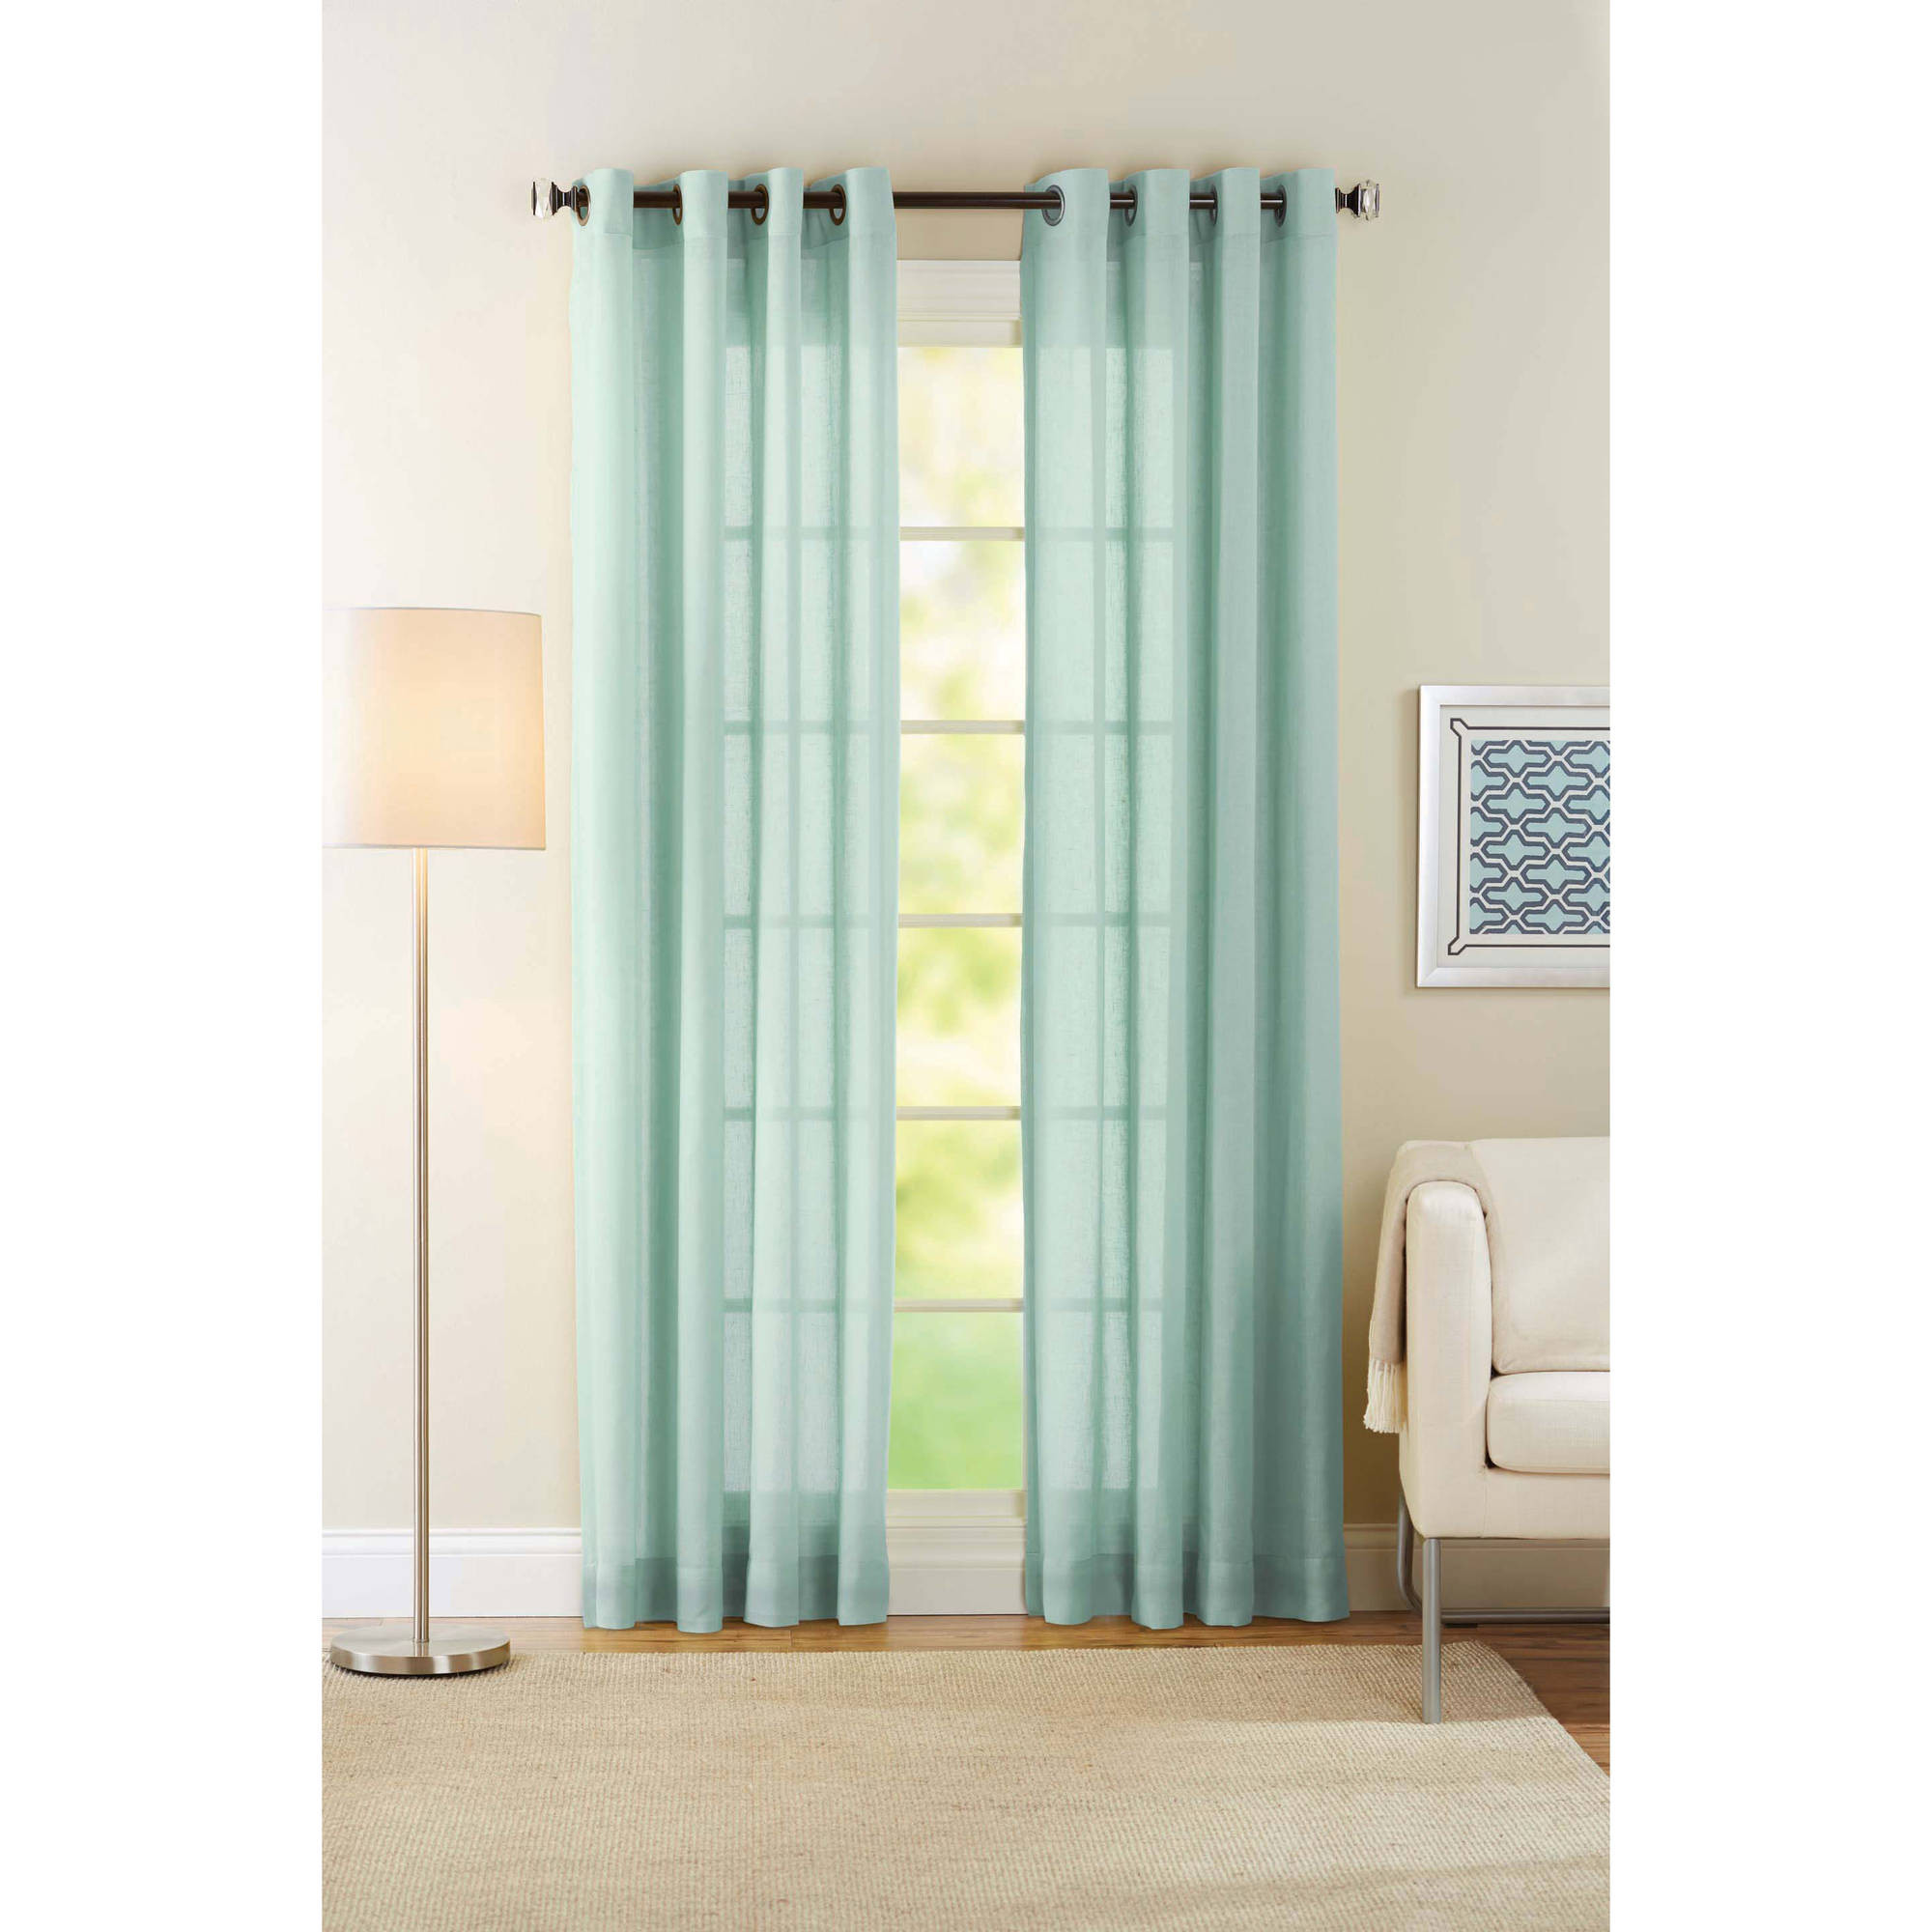 Kohls Kitchen Curtains
 Accessories Charming Kohls Curtains For Home Decorating